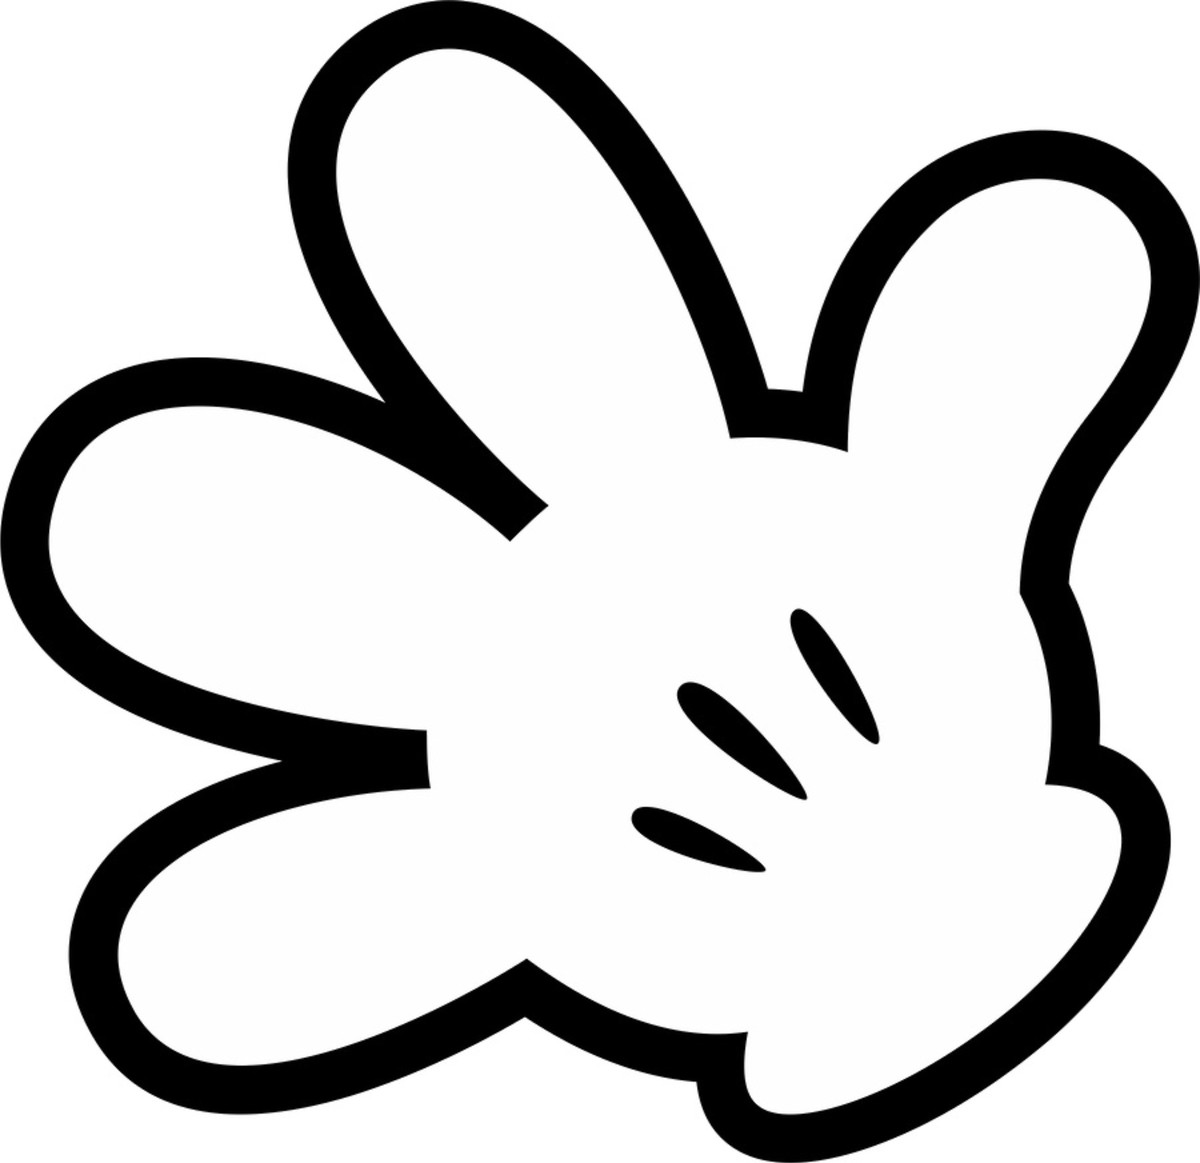 Mickey mouse hands clipart clipart kid 4